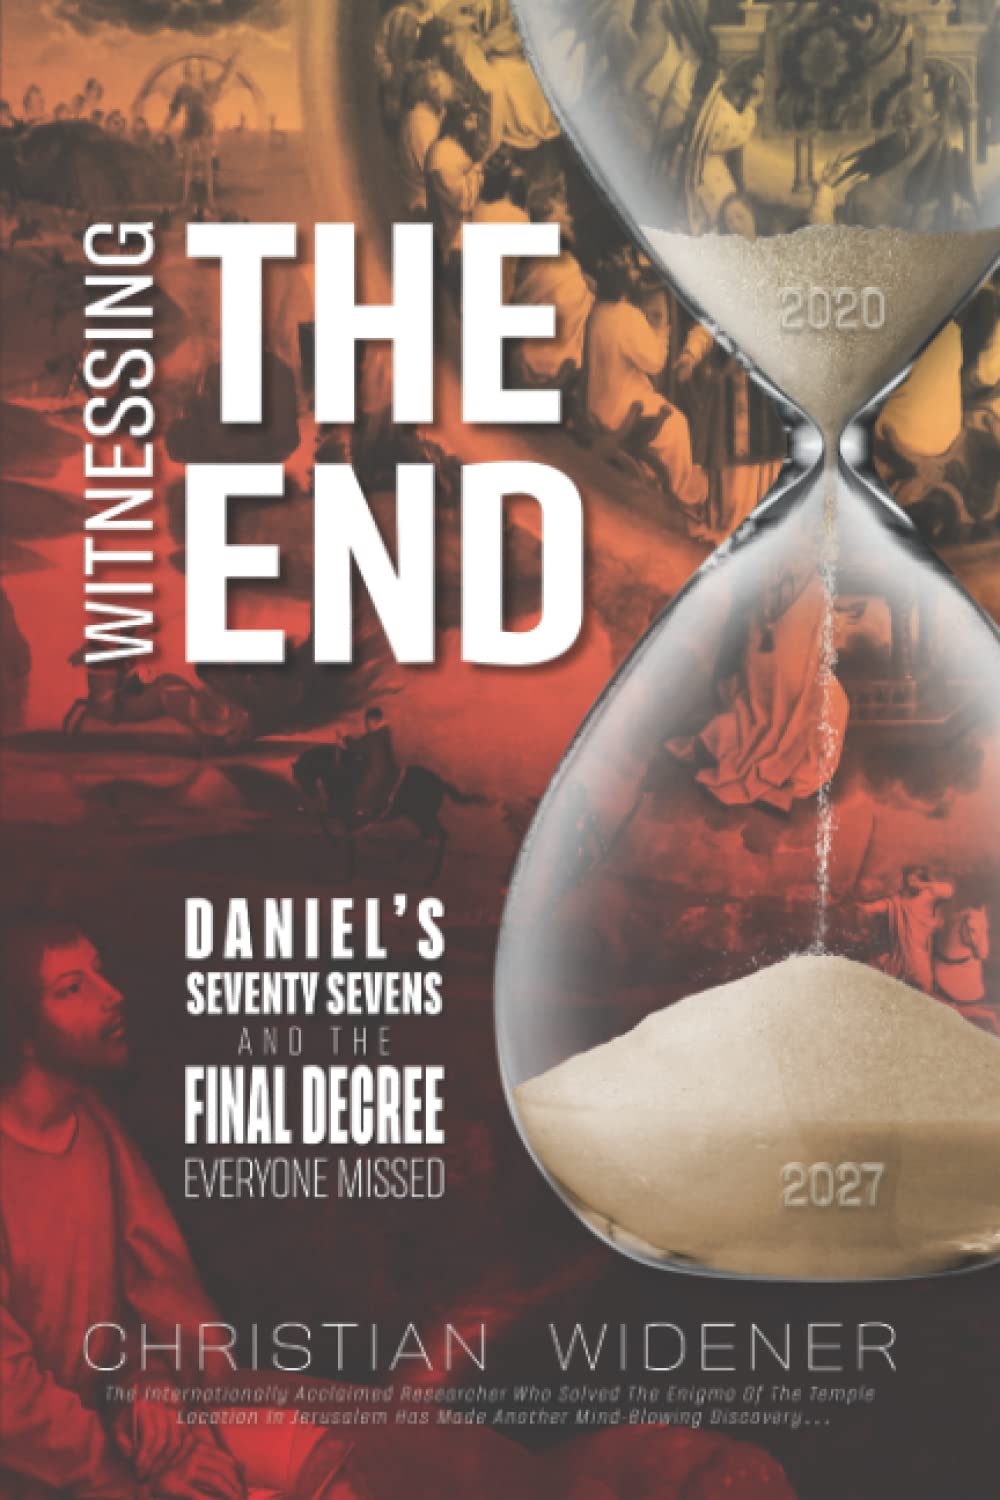 Witnessing the End: Daniel's Seventy Sevens and the Final Decree Everyone Missed